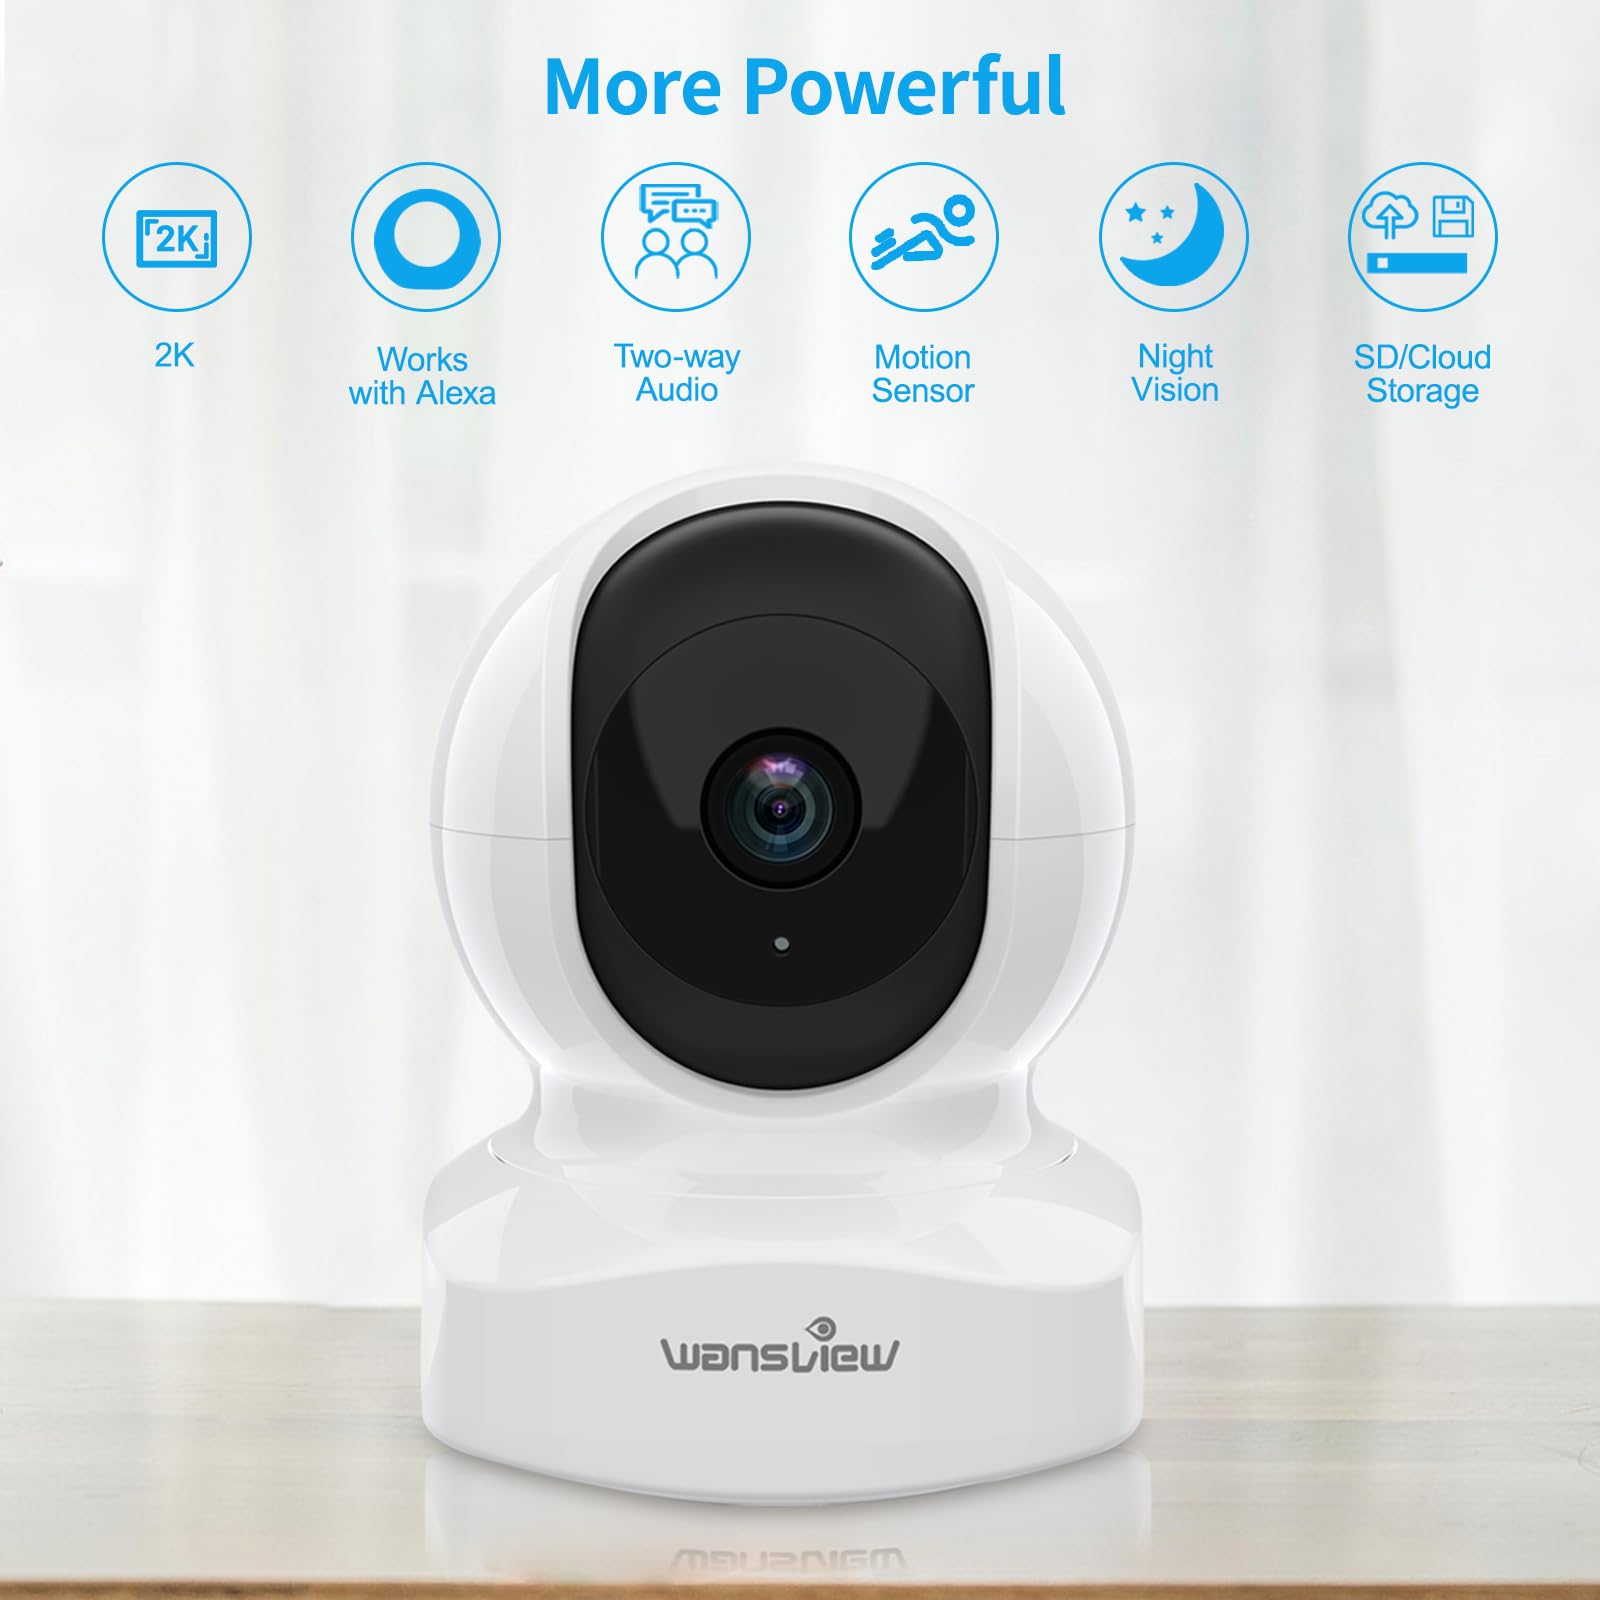 WANSVIEW Q5 1080P WIRELESS SECURITY CAMERA CLOUD IP BABY Monitor